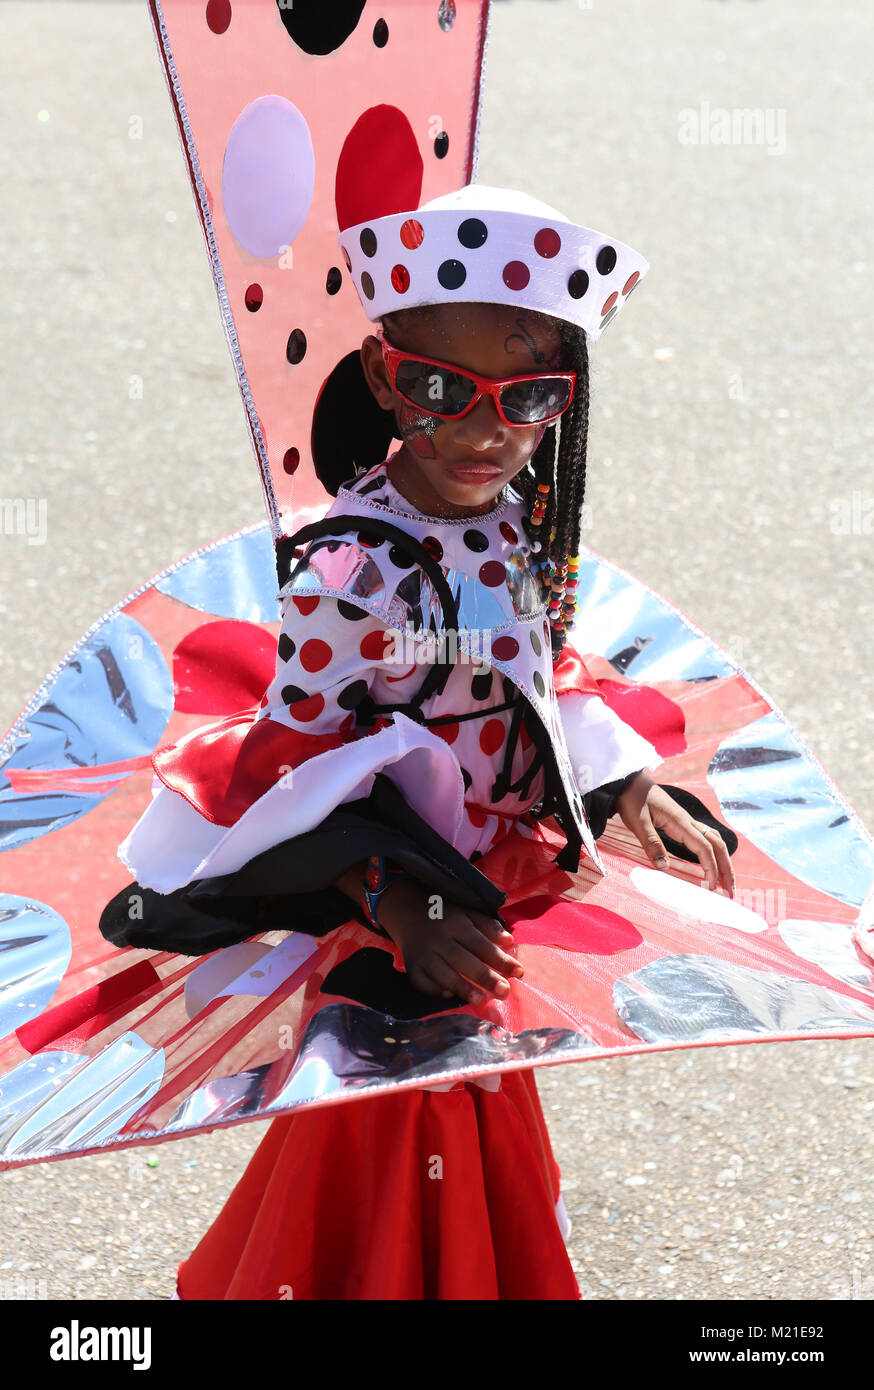 PORT OF SPAIN, TRINIDAD - Feb 03: Young masquerader performs during the annual Red Cross Junior Carnival competition in the Queen's Park Savannah on Feb 03, 2018 in Port of Spain, Trinidad.  (Photo by Sean Drakes/Alamy Live News) Stock Photo